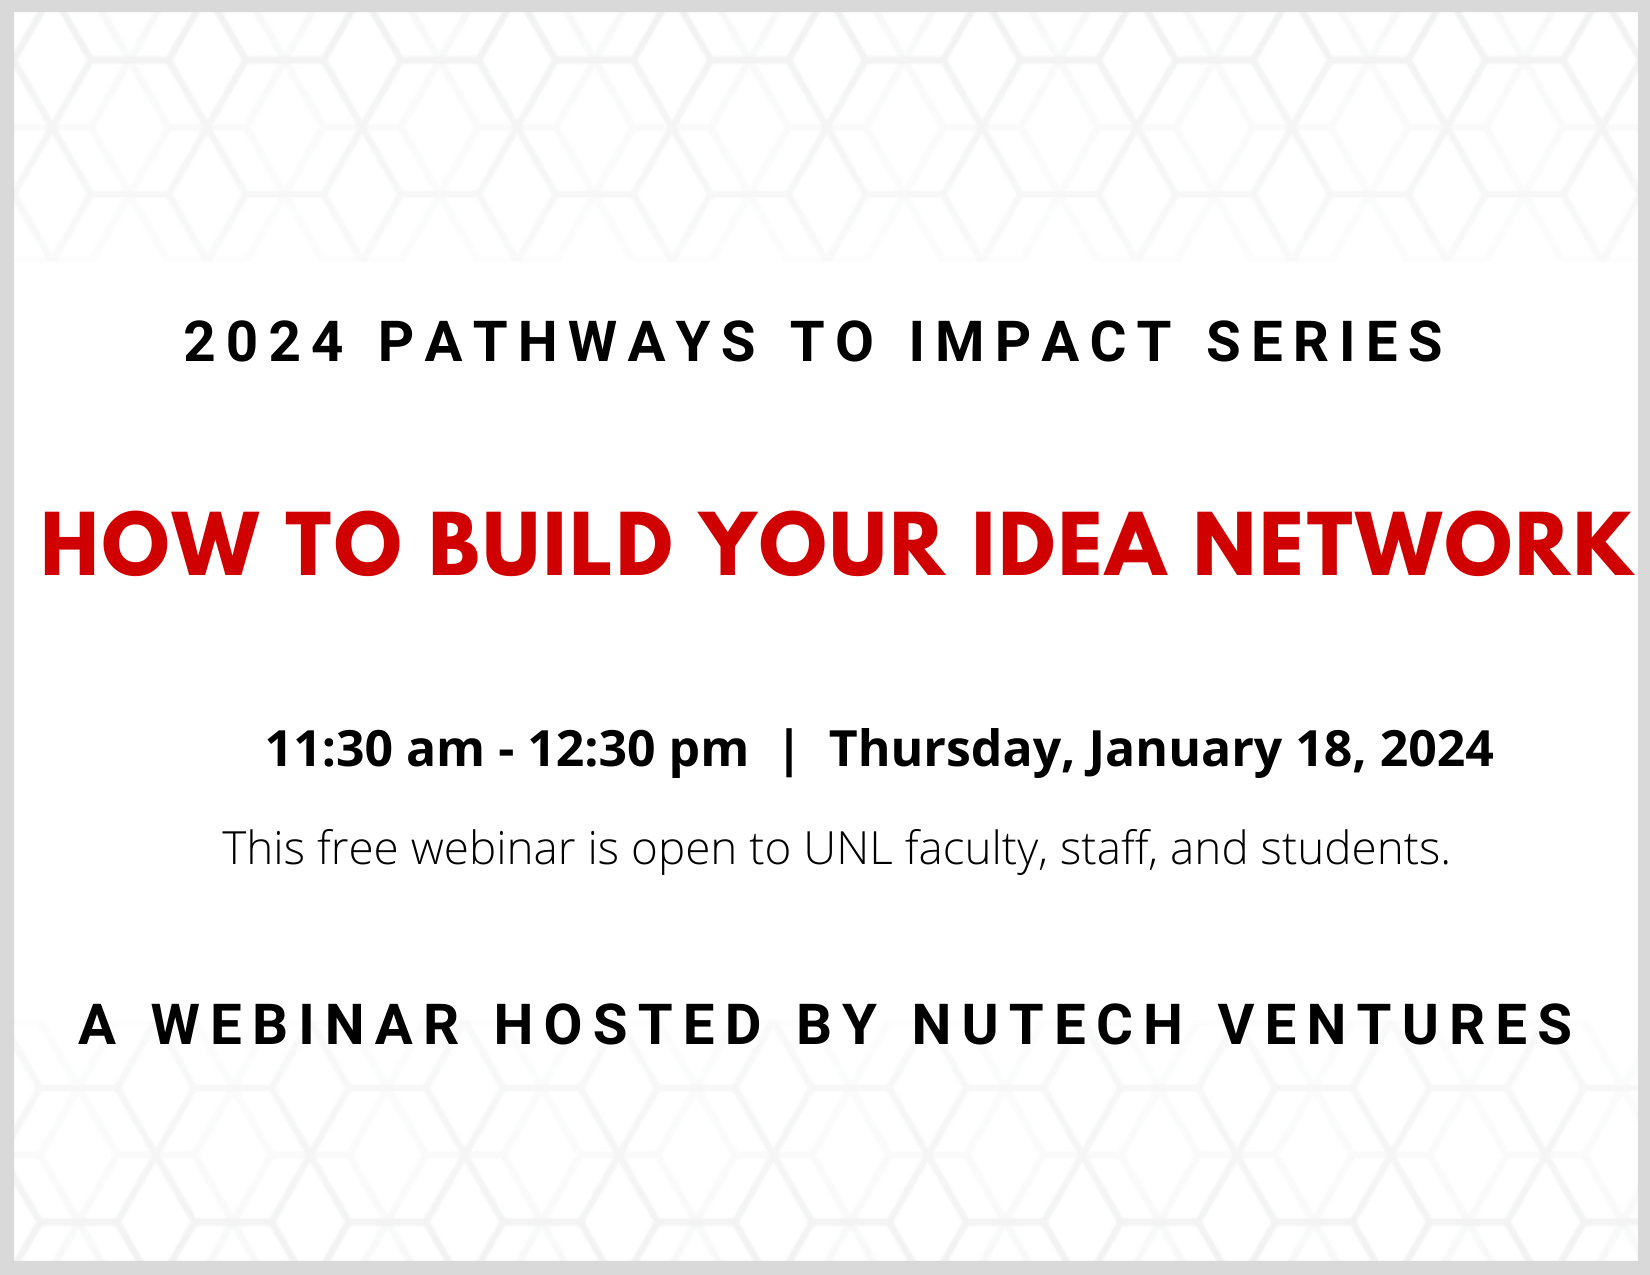 "How to Build Your Idea Network" will be the first in the 2024 Pathways to Impact series, hosted by NUtech Ventures.